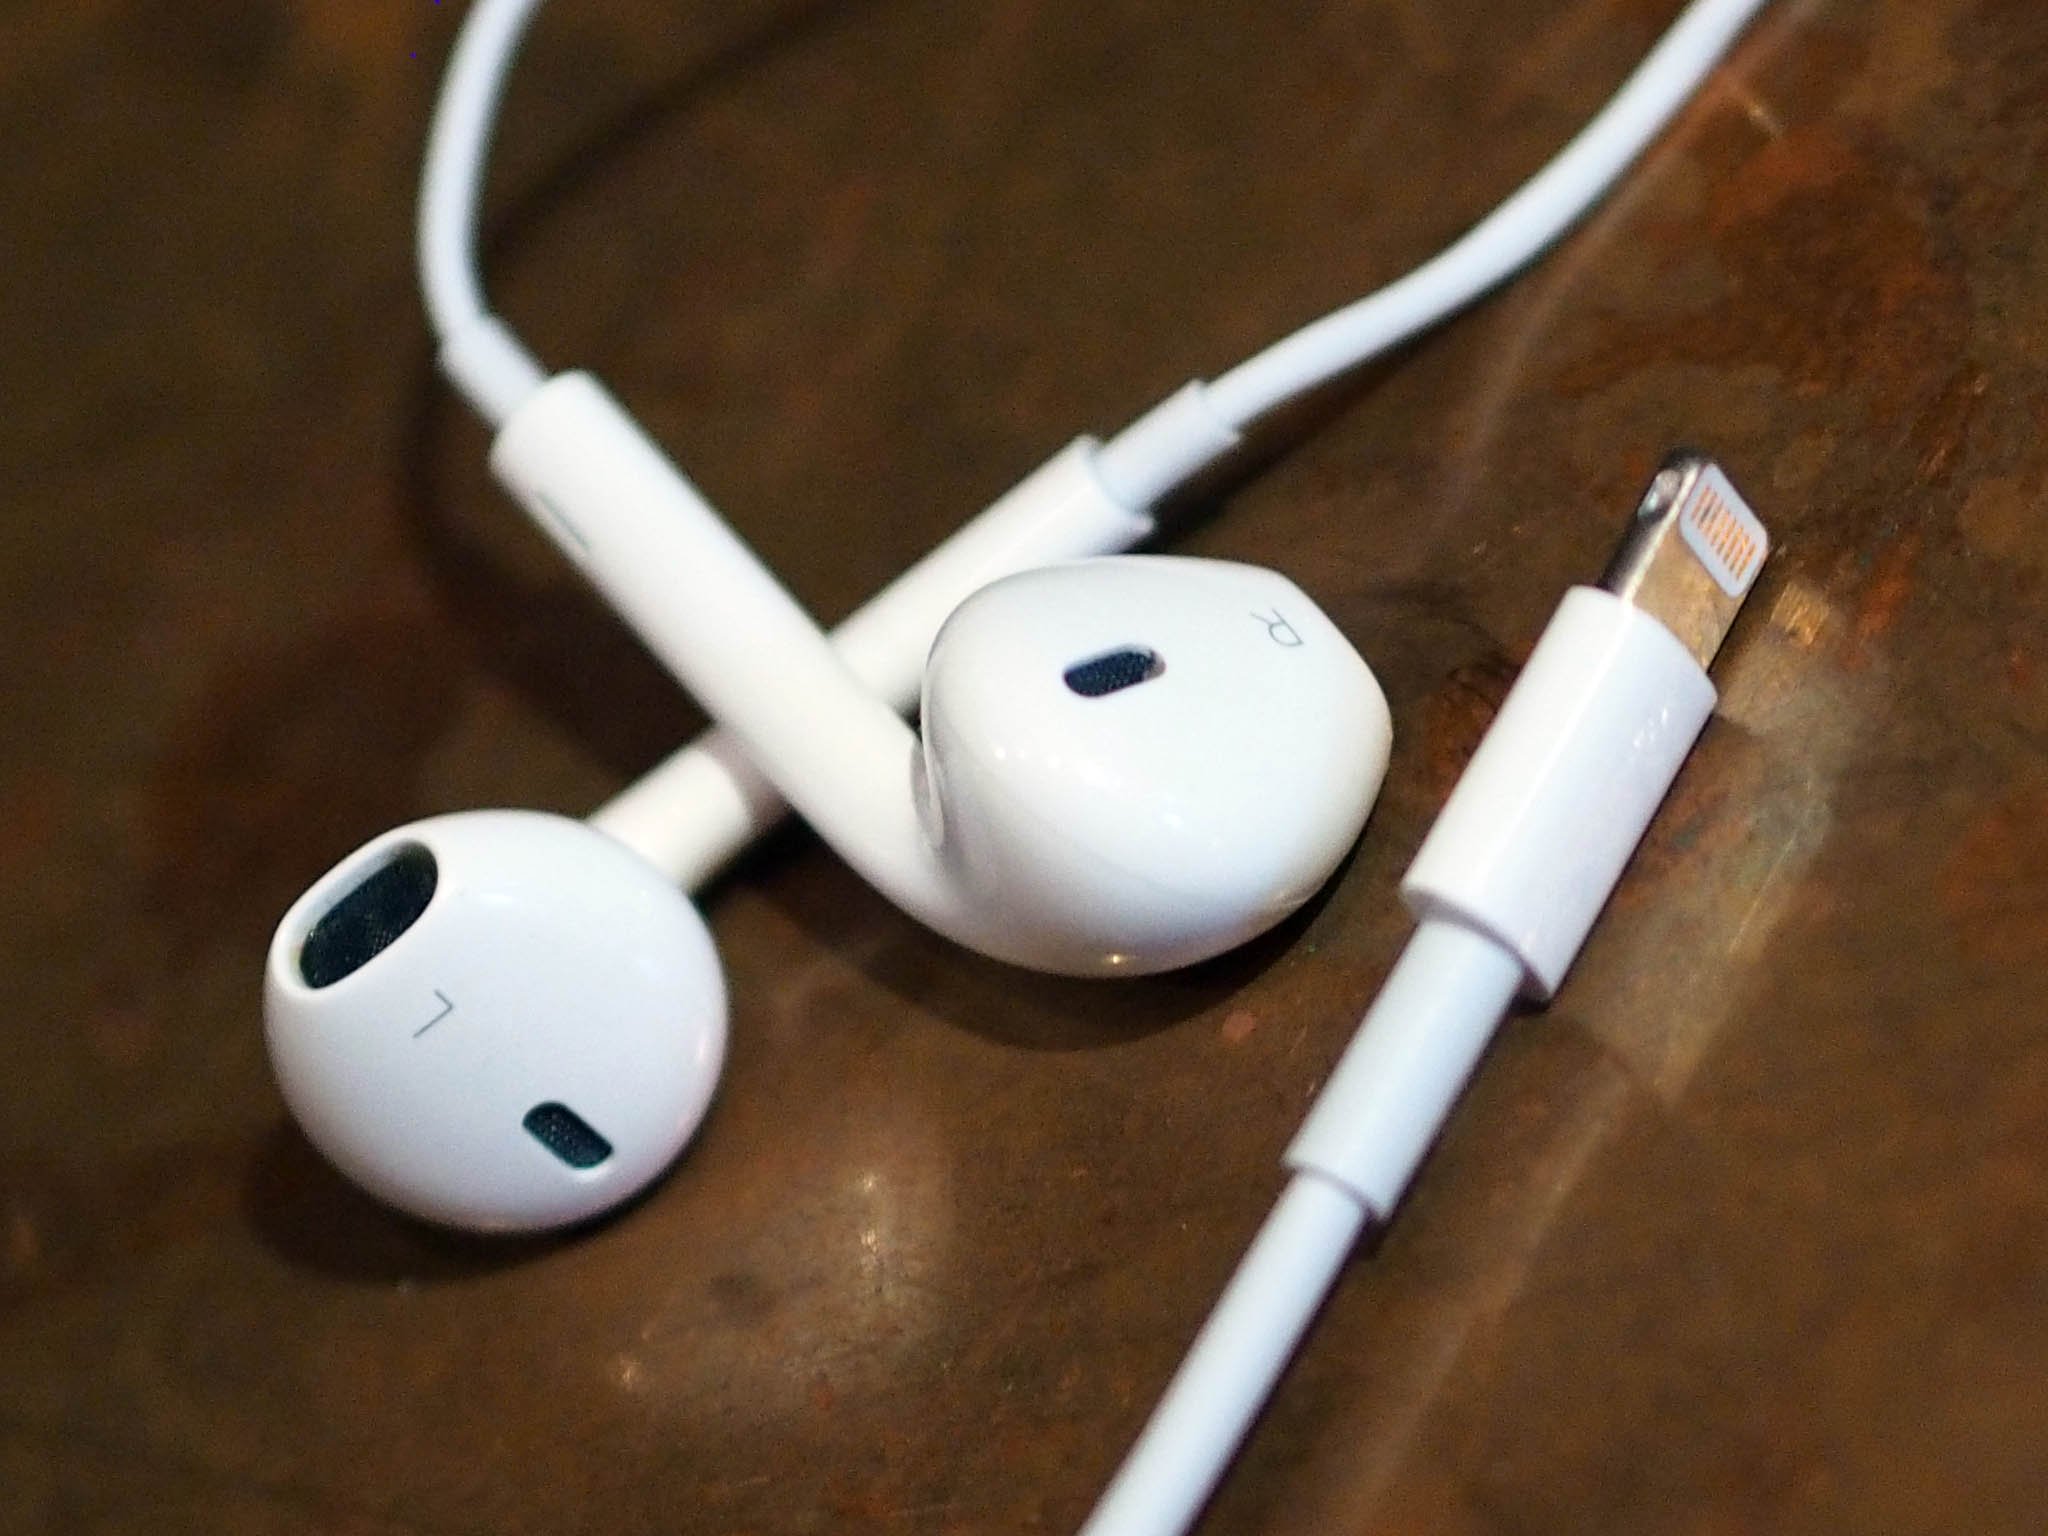 where-do-i-plug-in-earbuds-on-iphone-11